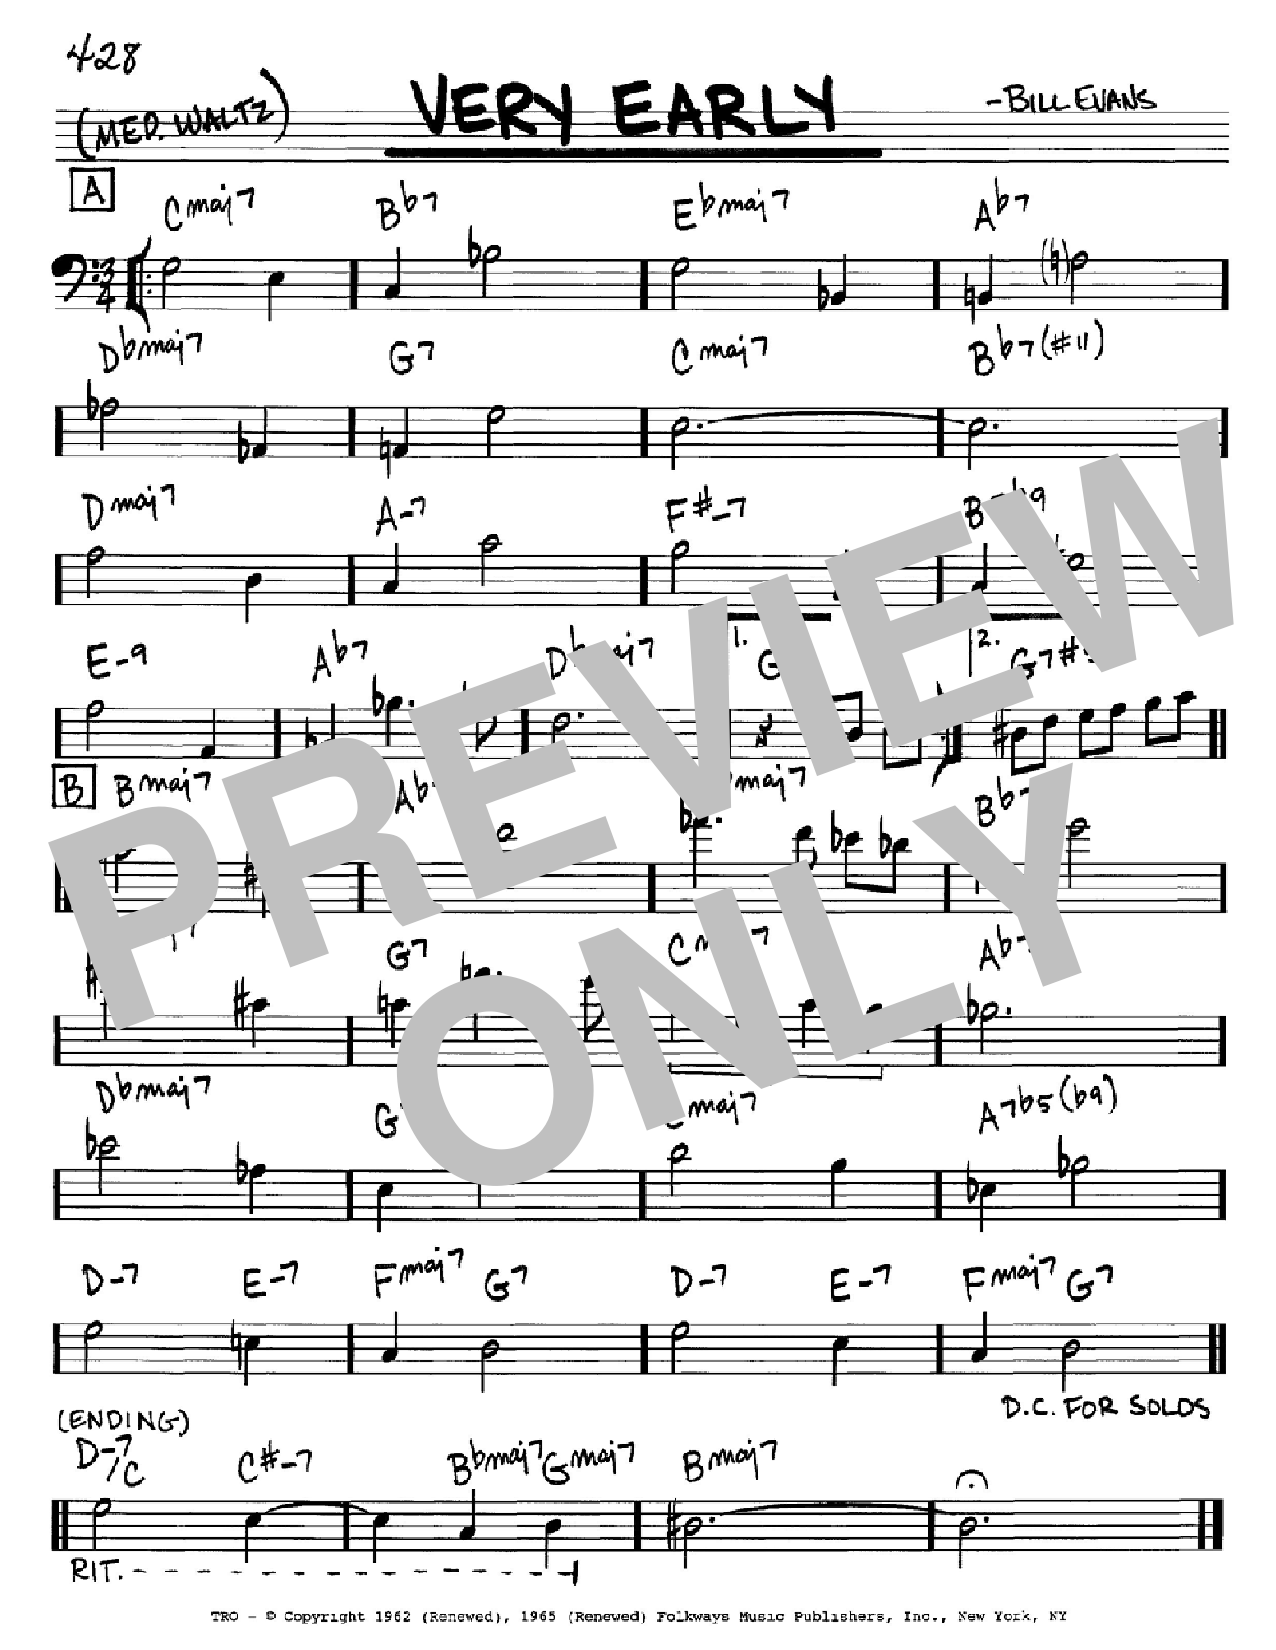 Download Bill Evans Very Early Sheet Music